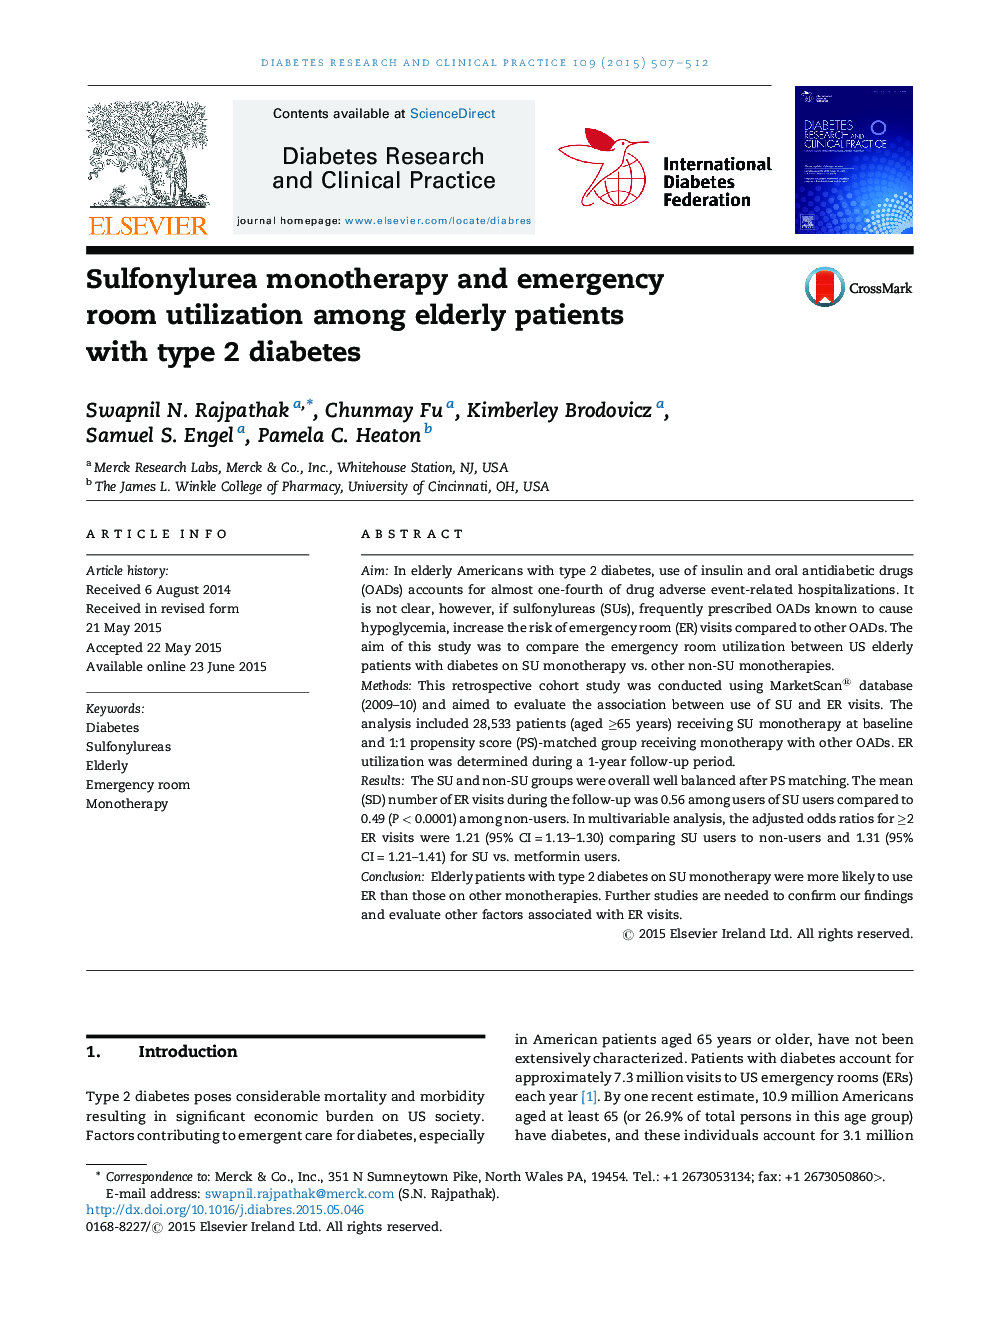 Sulfonylurea monotherapy and emergency room utilization among elderly patients with type 2 diabetes